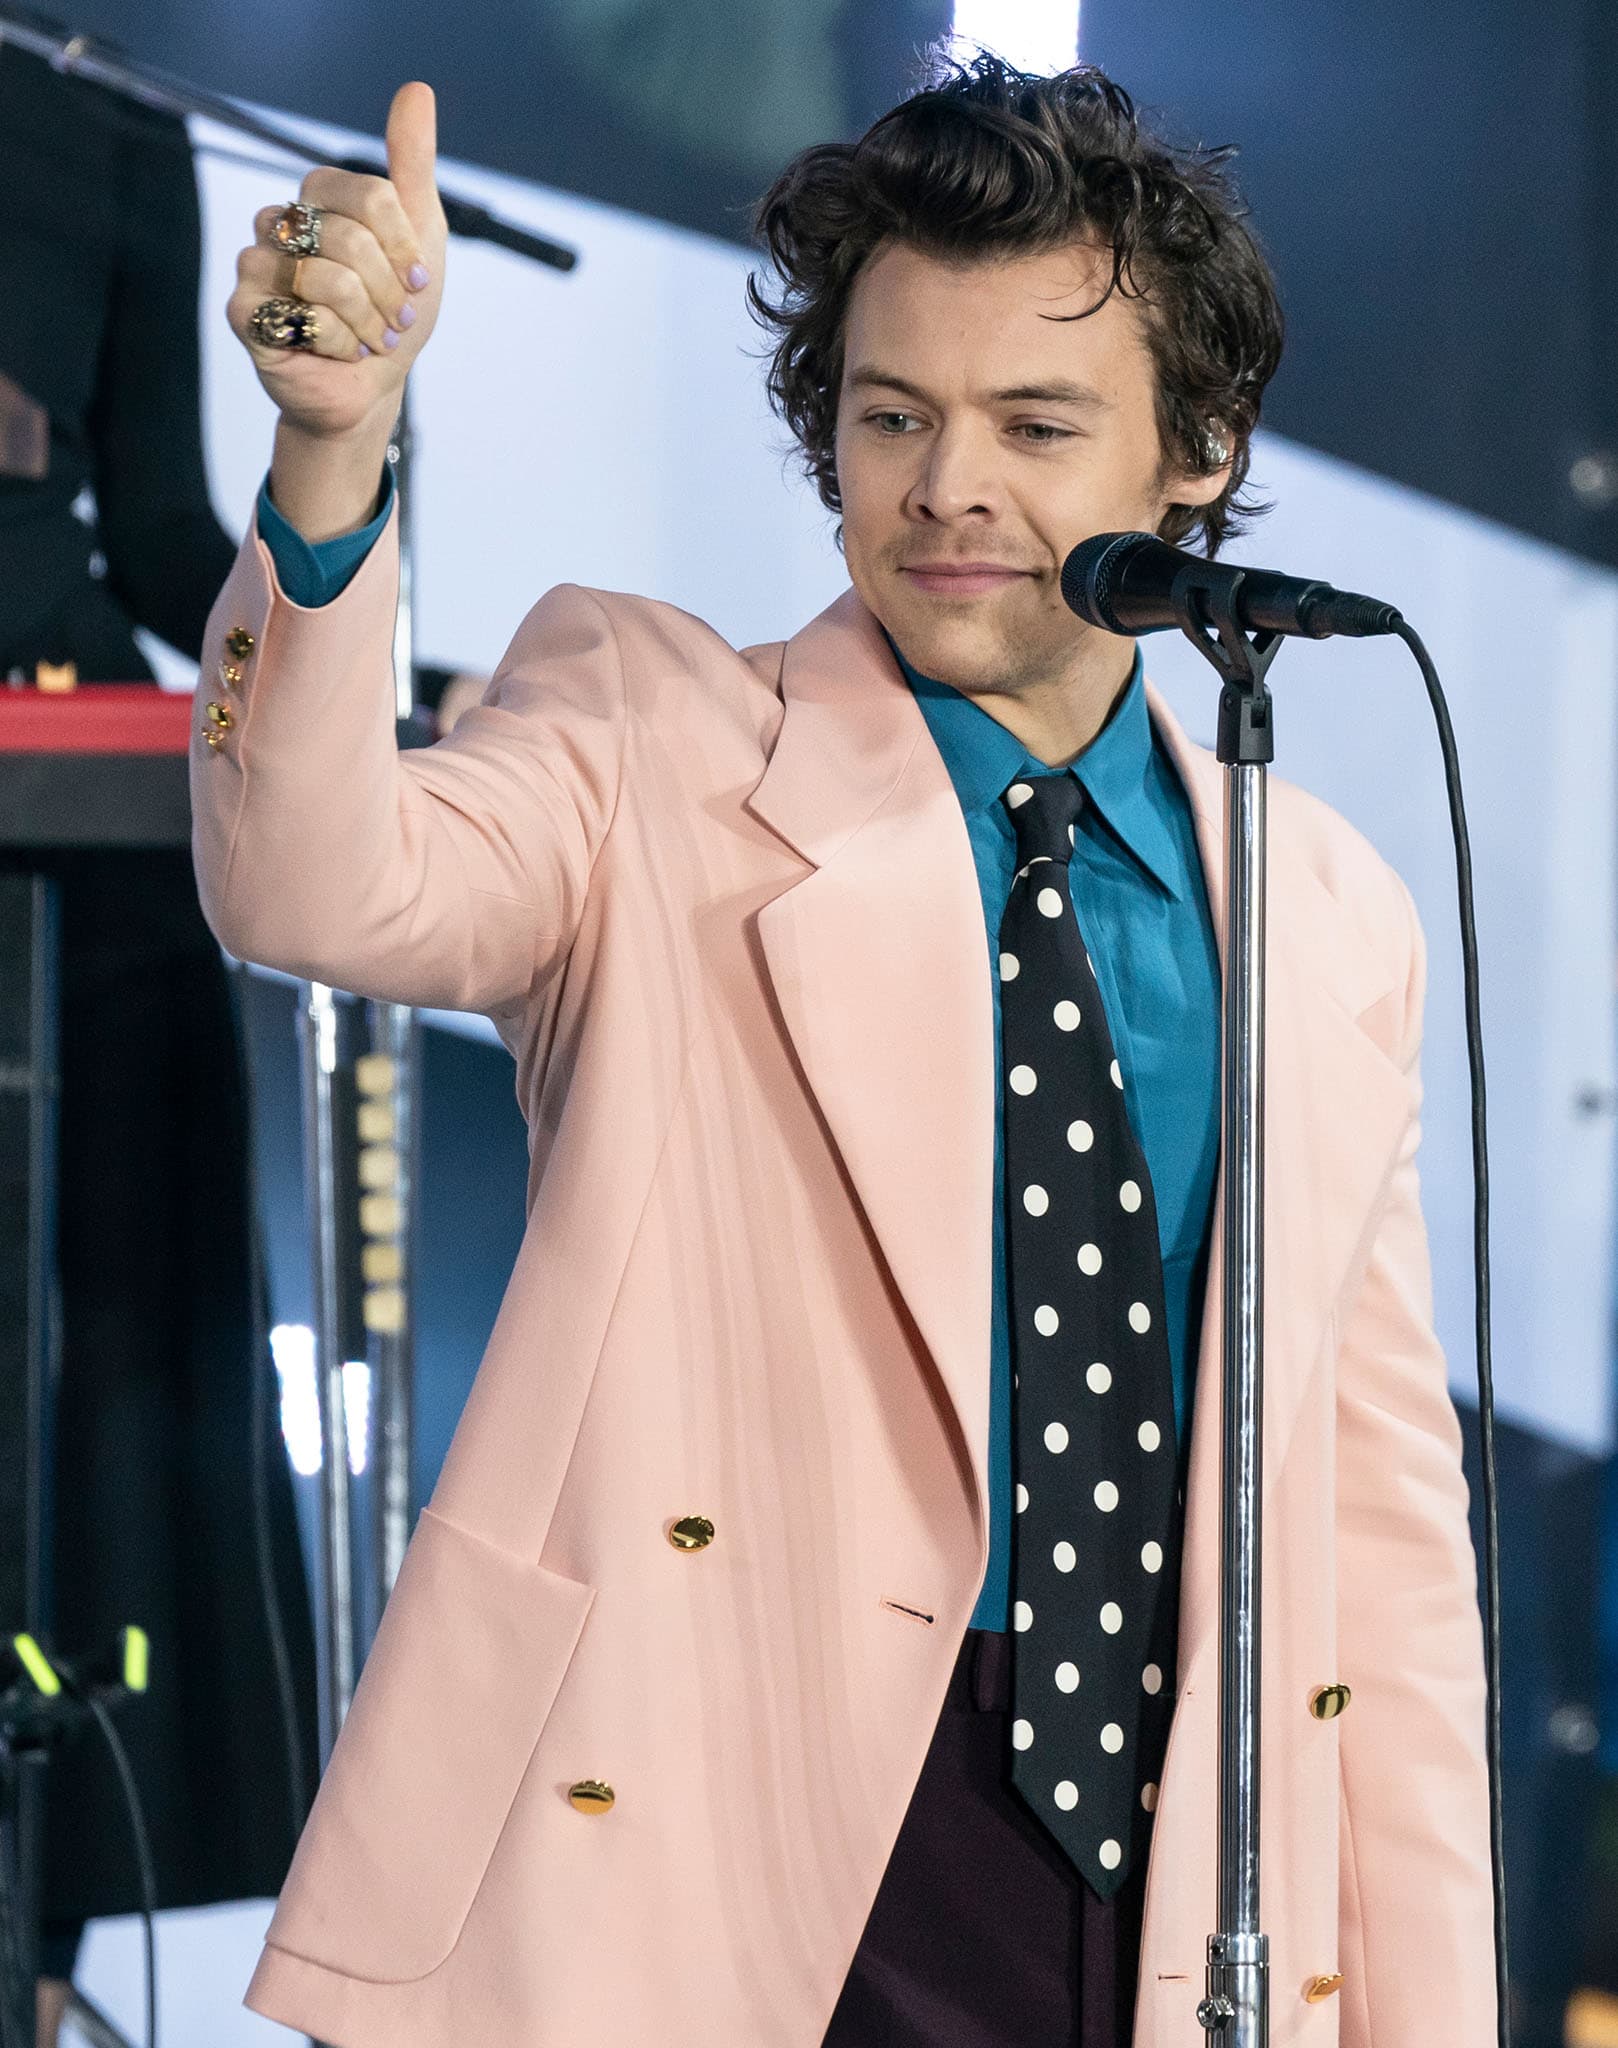 Aside from his hit songs, including Sign of the Times and Watermelon Sugar, former One Direction member Harry Styles is also known for breaking gender barriers when it comes to fashion